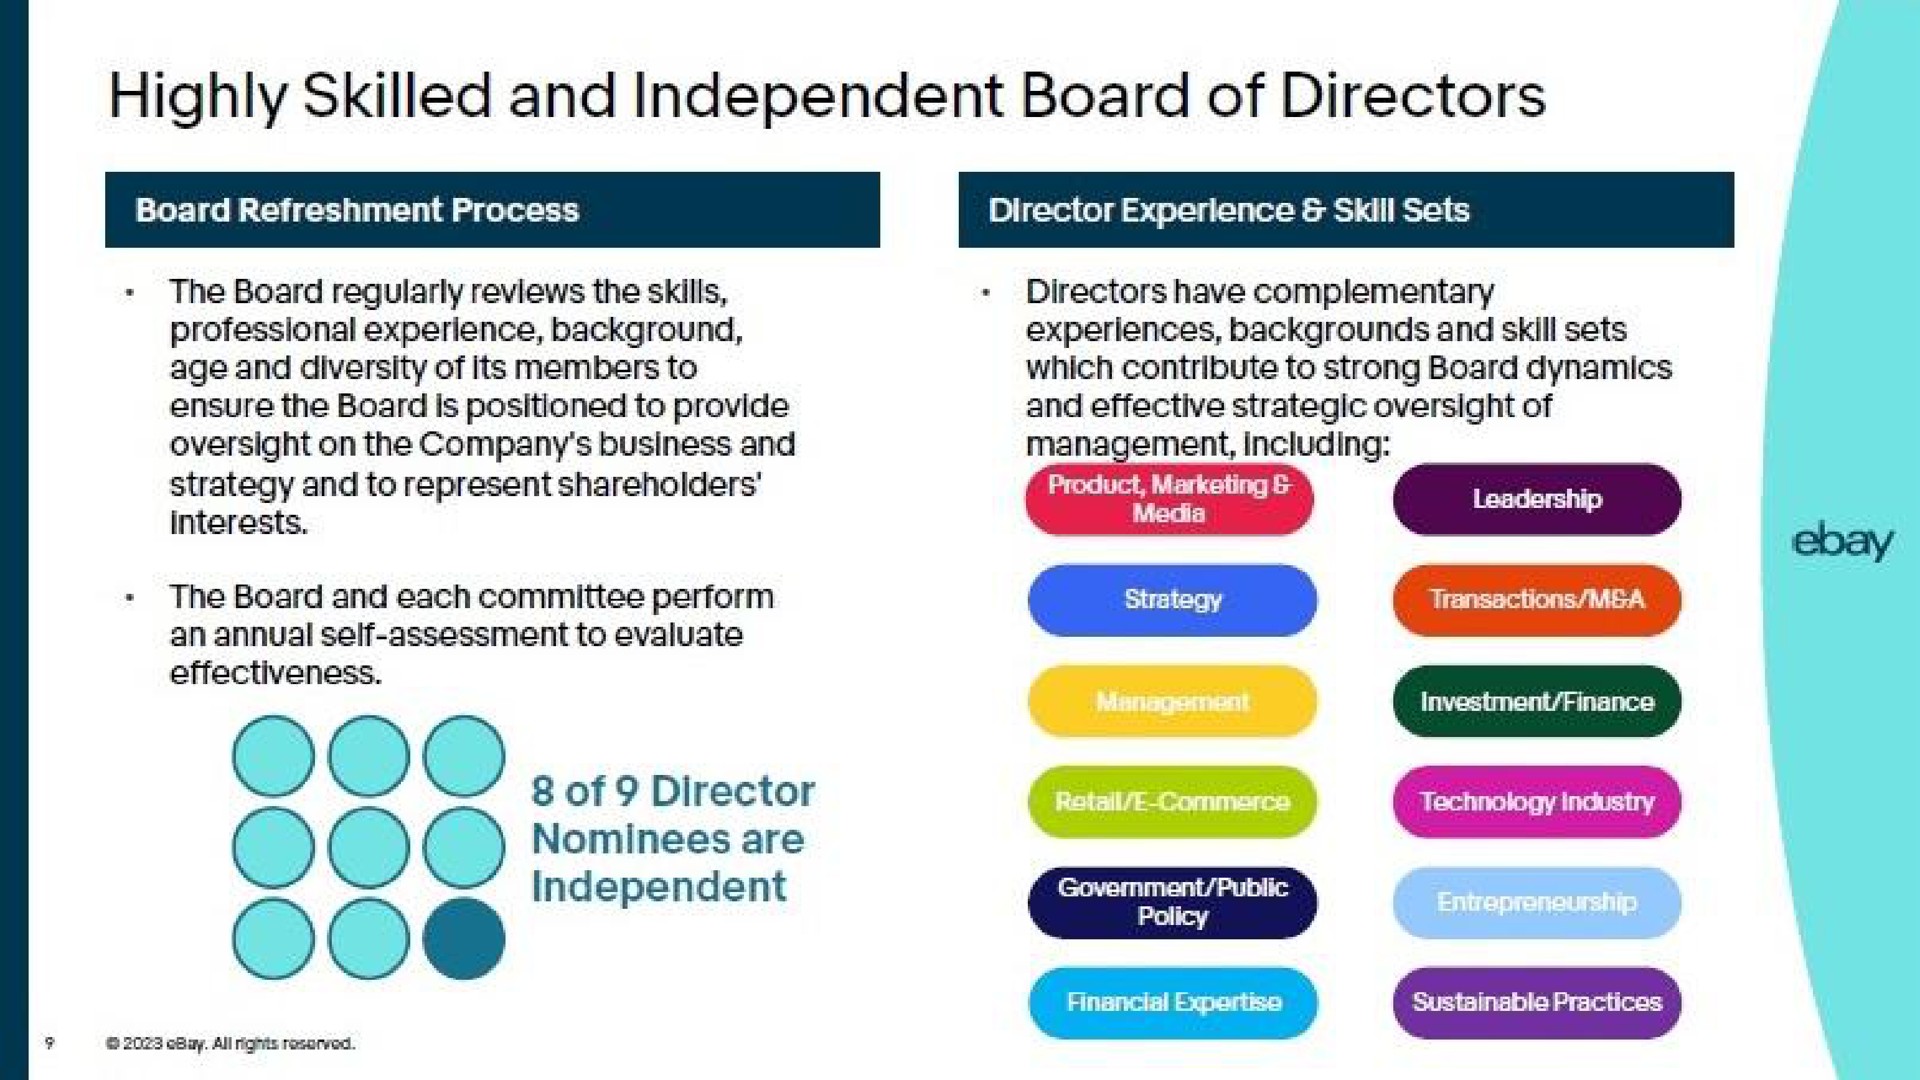 highly skilled and independent board of directors strategy and to represent shareholders interests of director nominees are errant | eBay